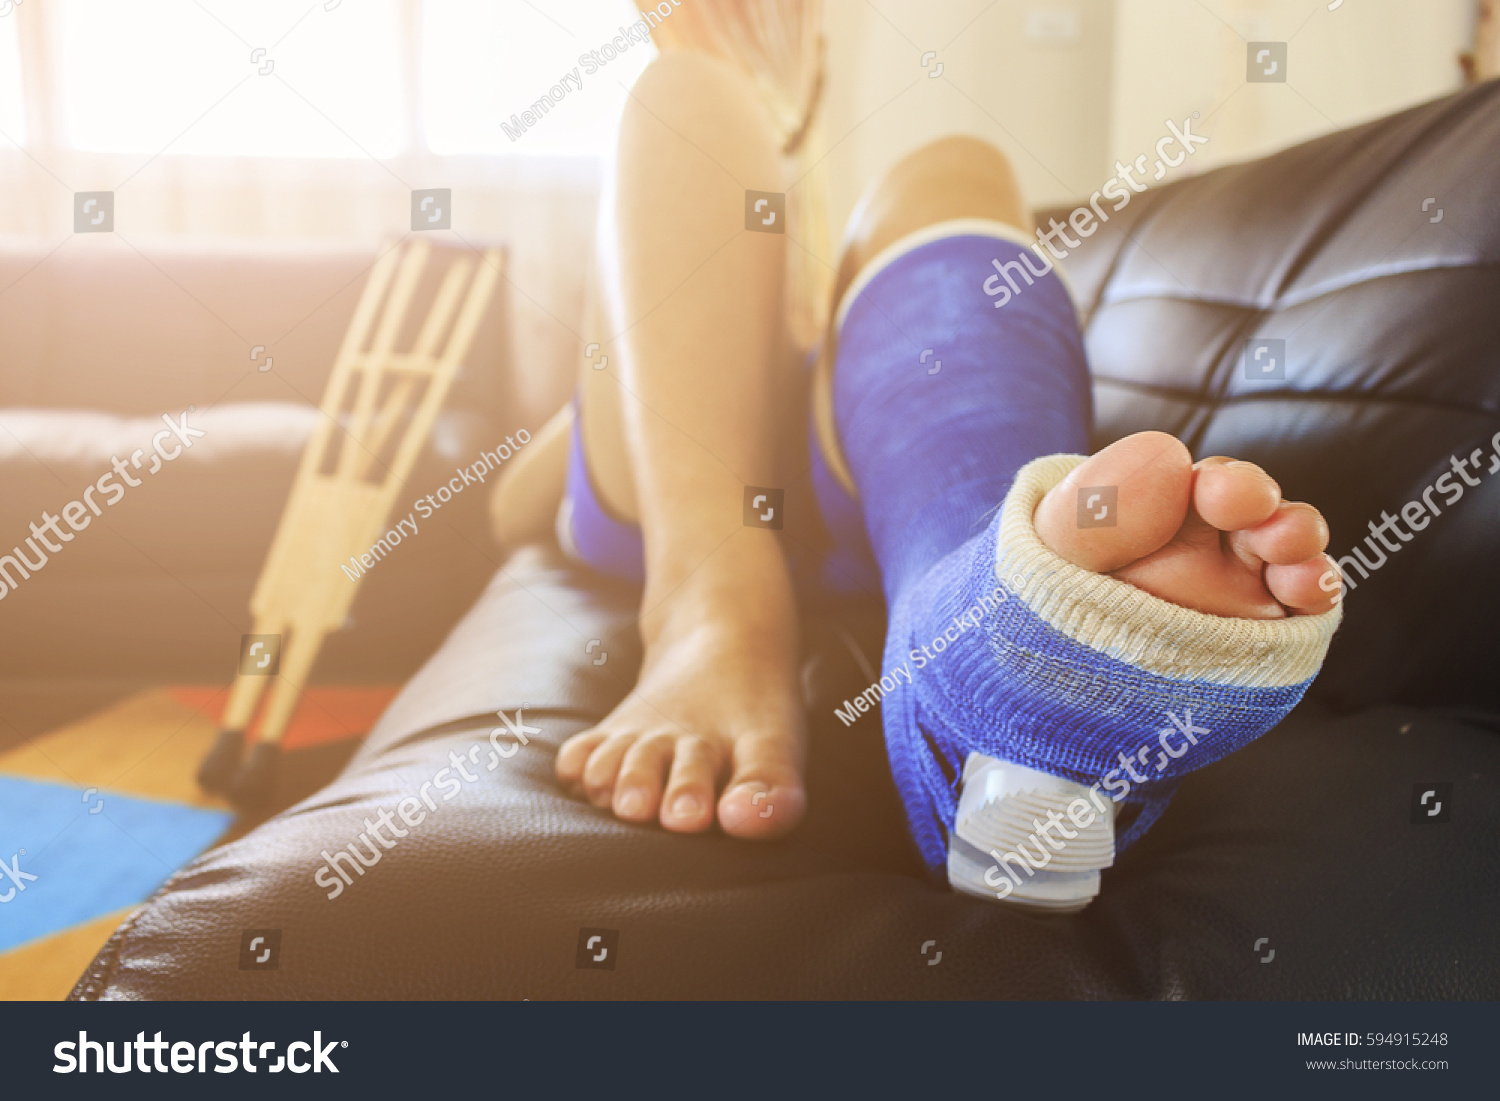 broken leg in a plaster cast with soft-focus in the background. over light #594915248